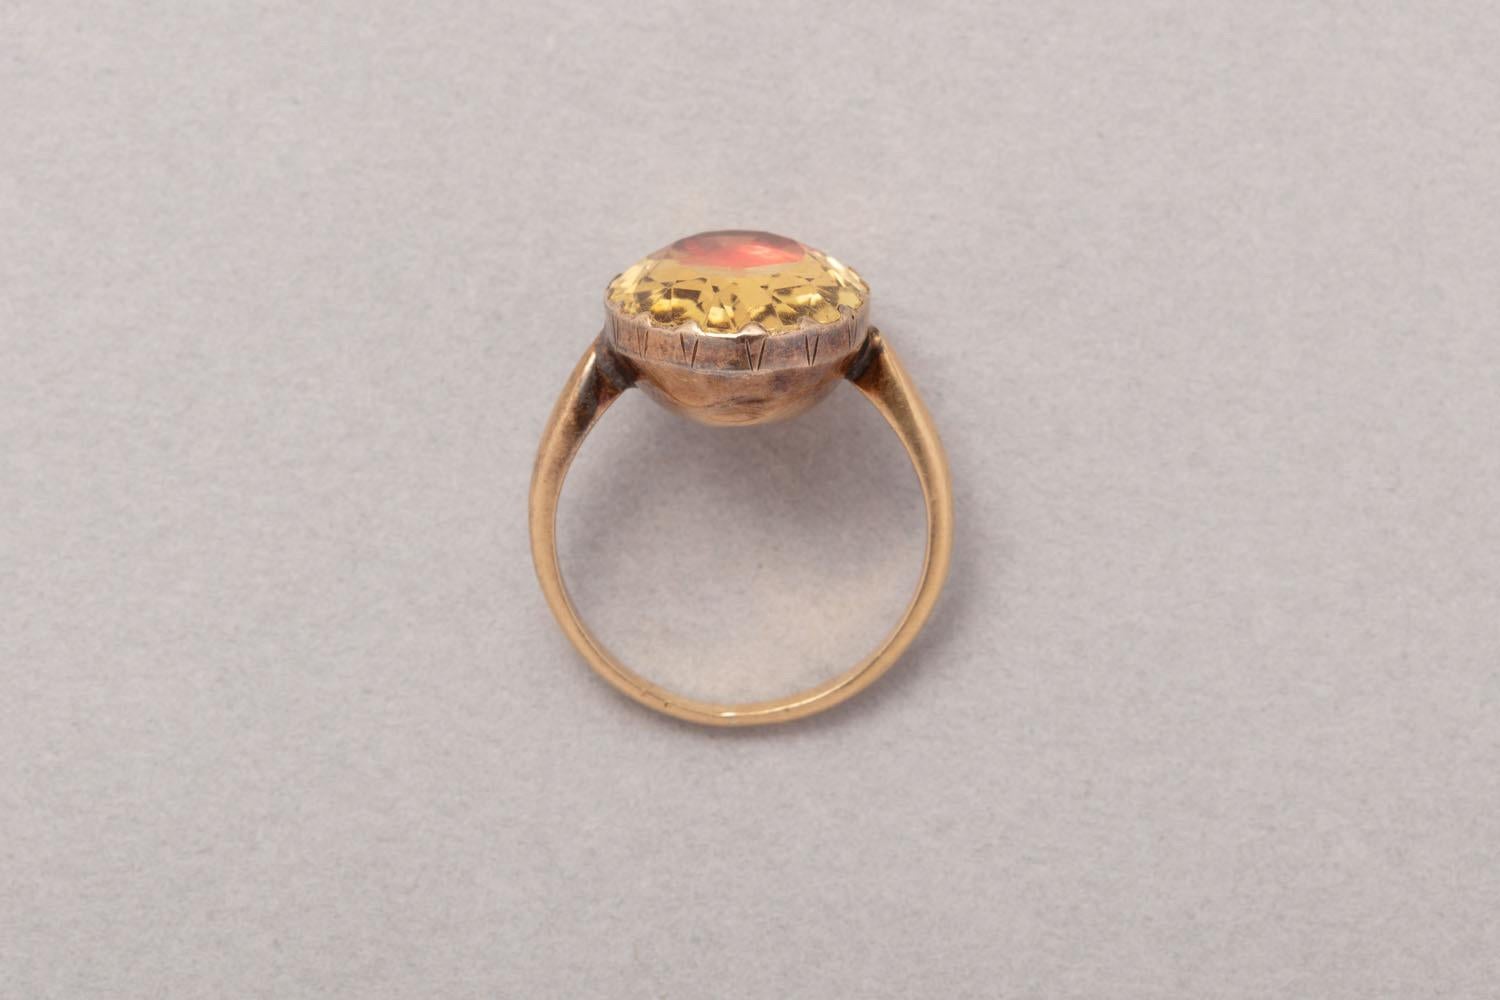 A 18 carat rose gold ring set with a large oval faceted citrine on orange gold foil, South of France, circa 1920
weight: 5.3 grams
ring size: 17.25 mm / 7 US
width: 1.5 - 17 mm
